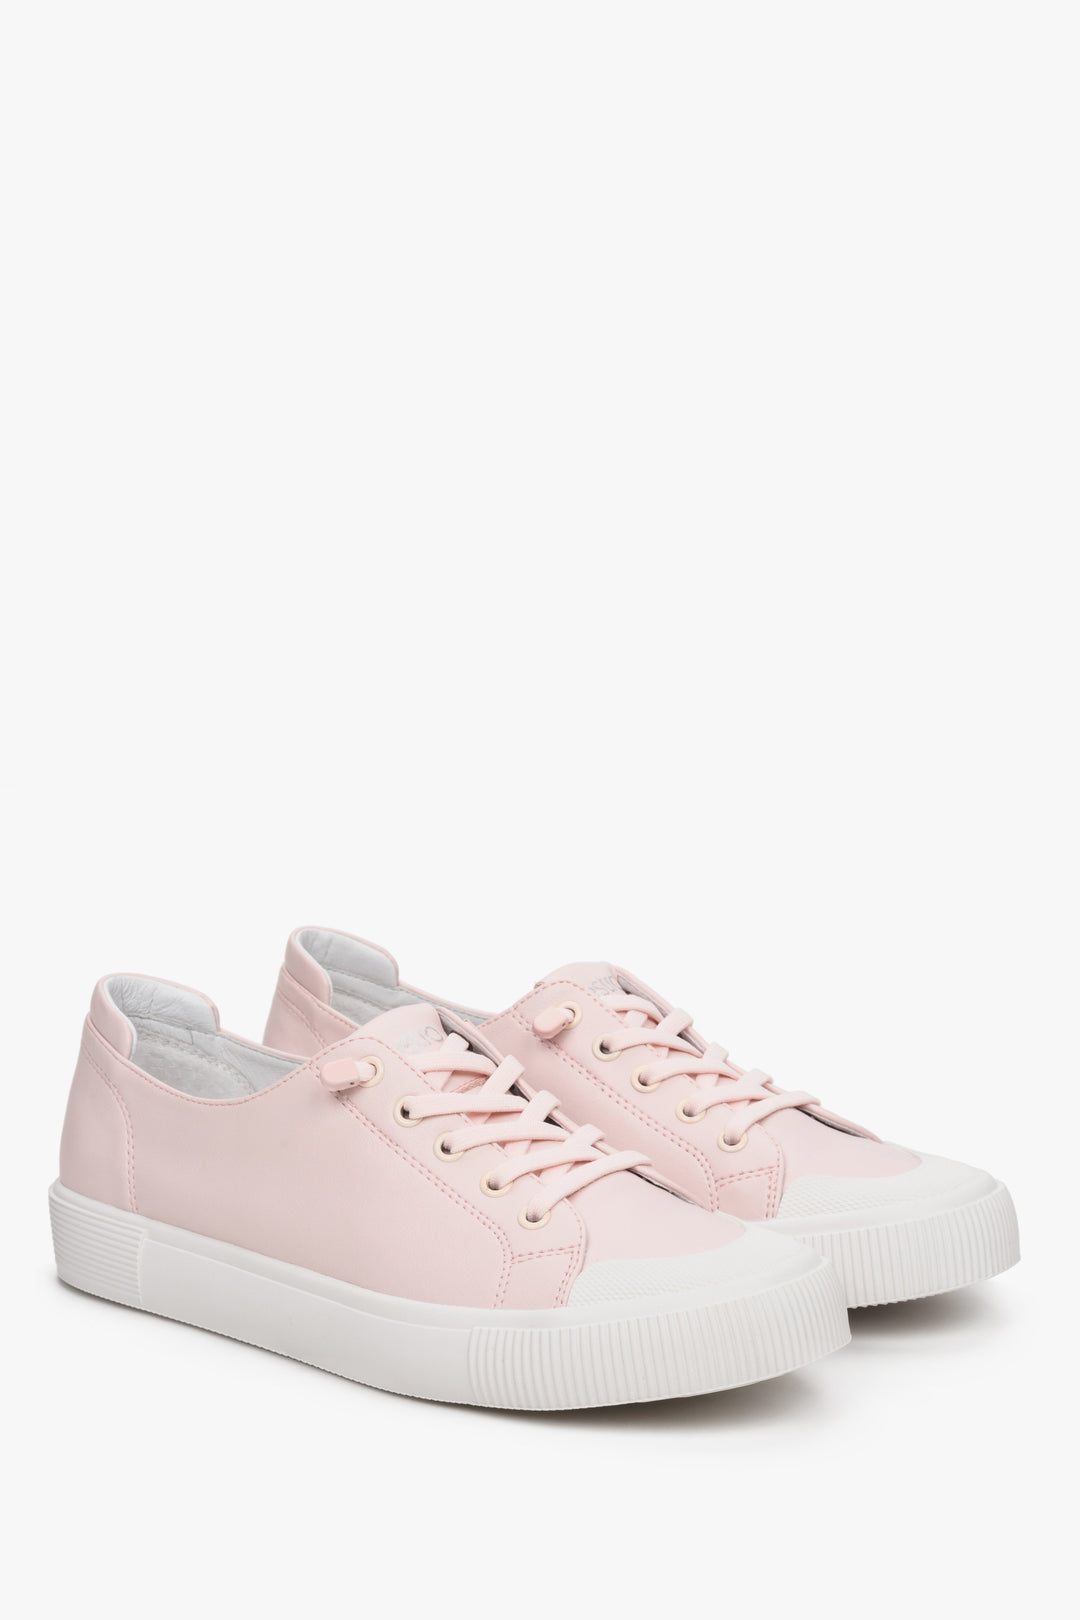 Women's light pink sneakers made of genuine leather by Estro, laced.